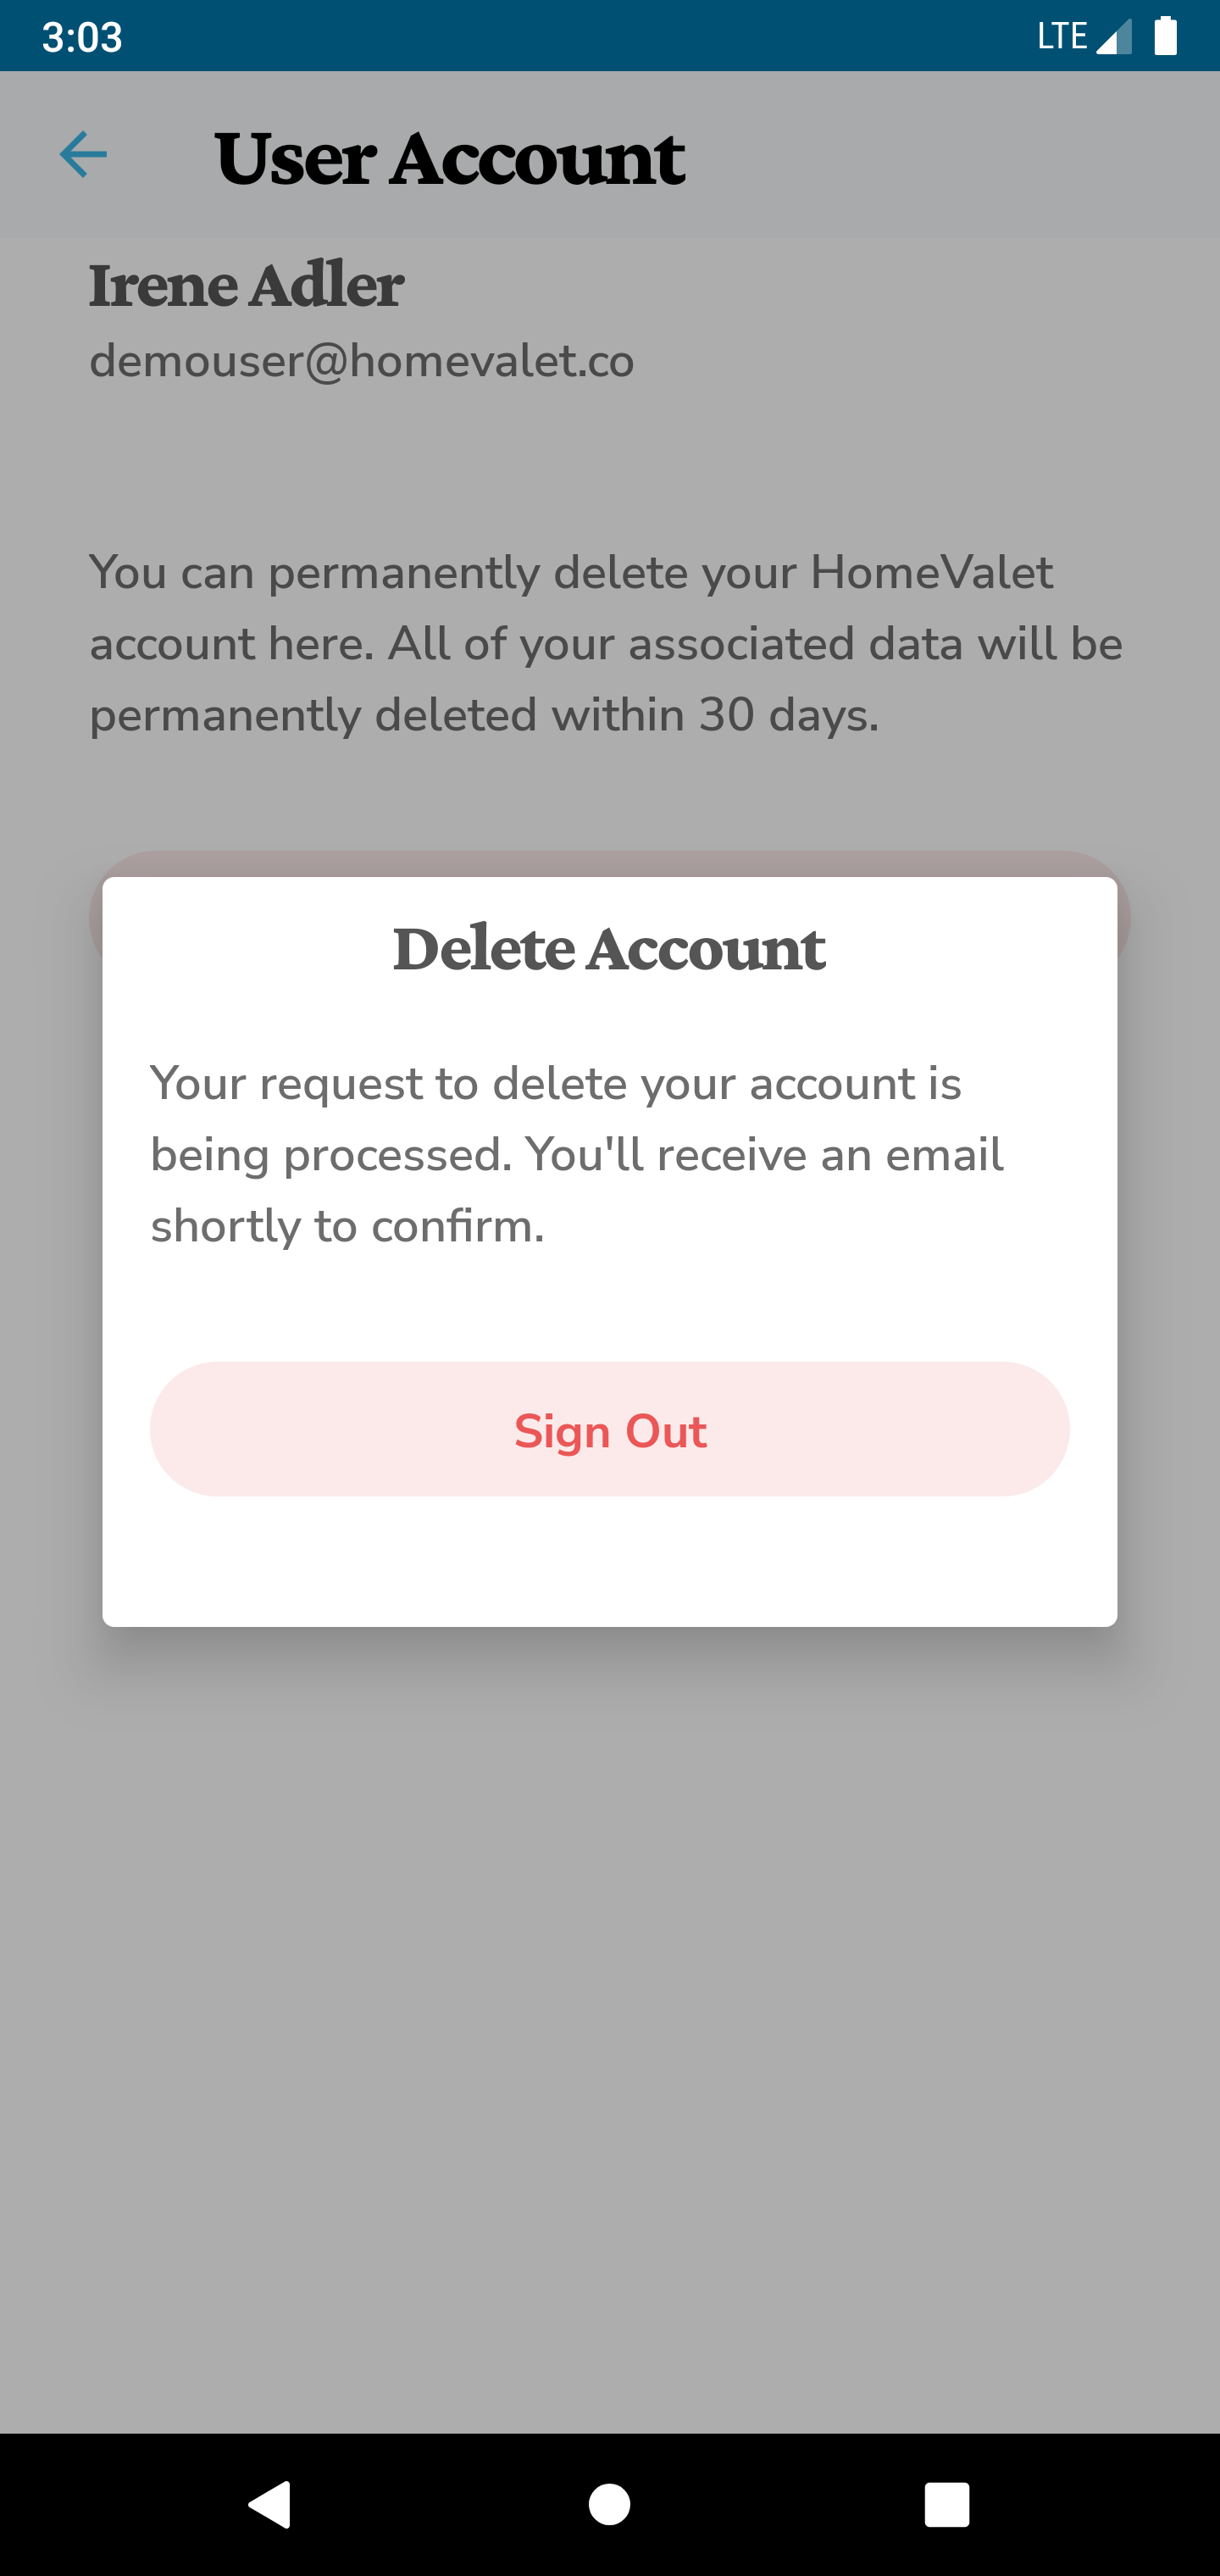 delete account request confirmation pop up with sign out button